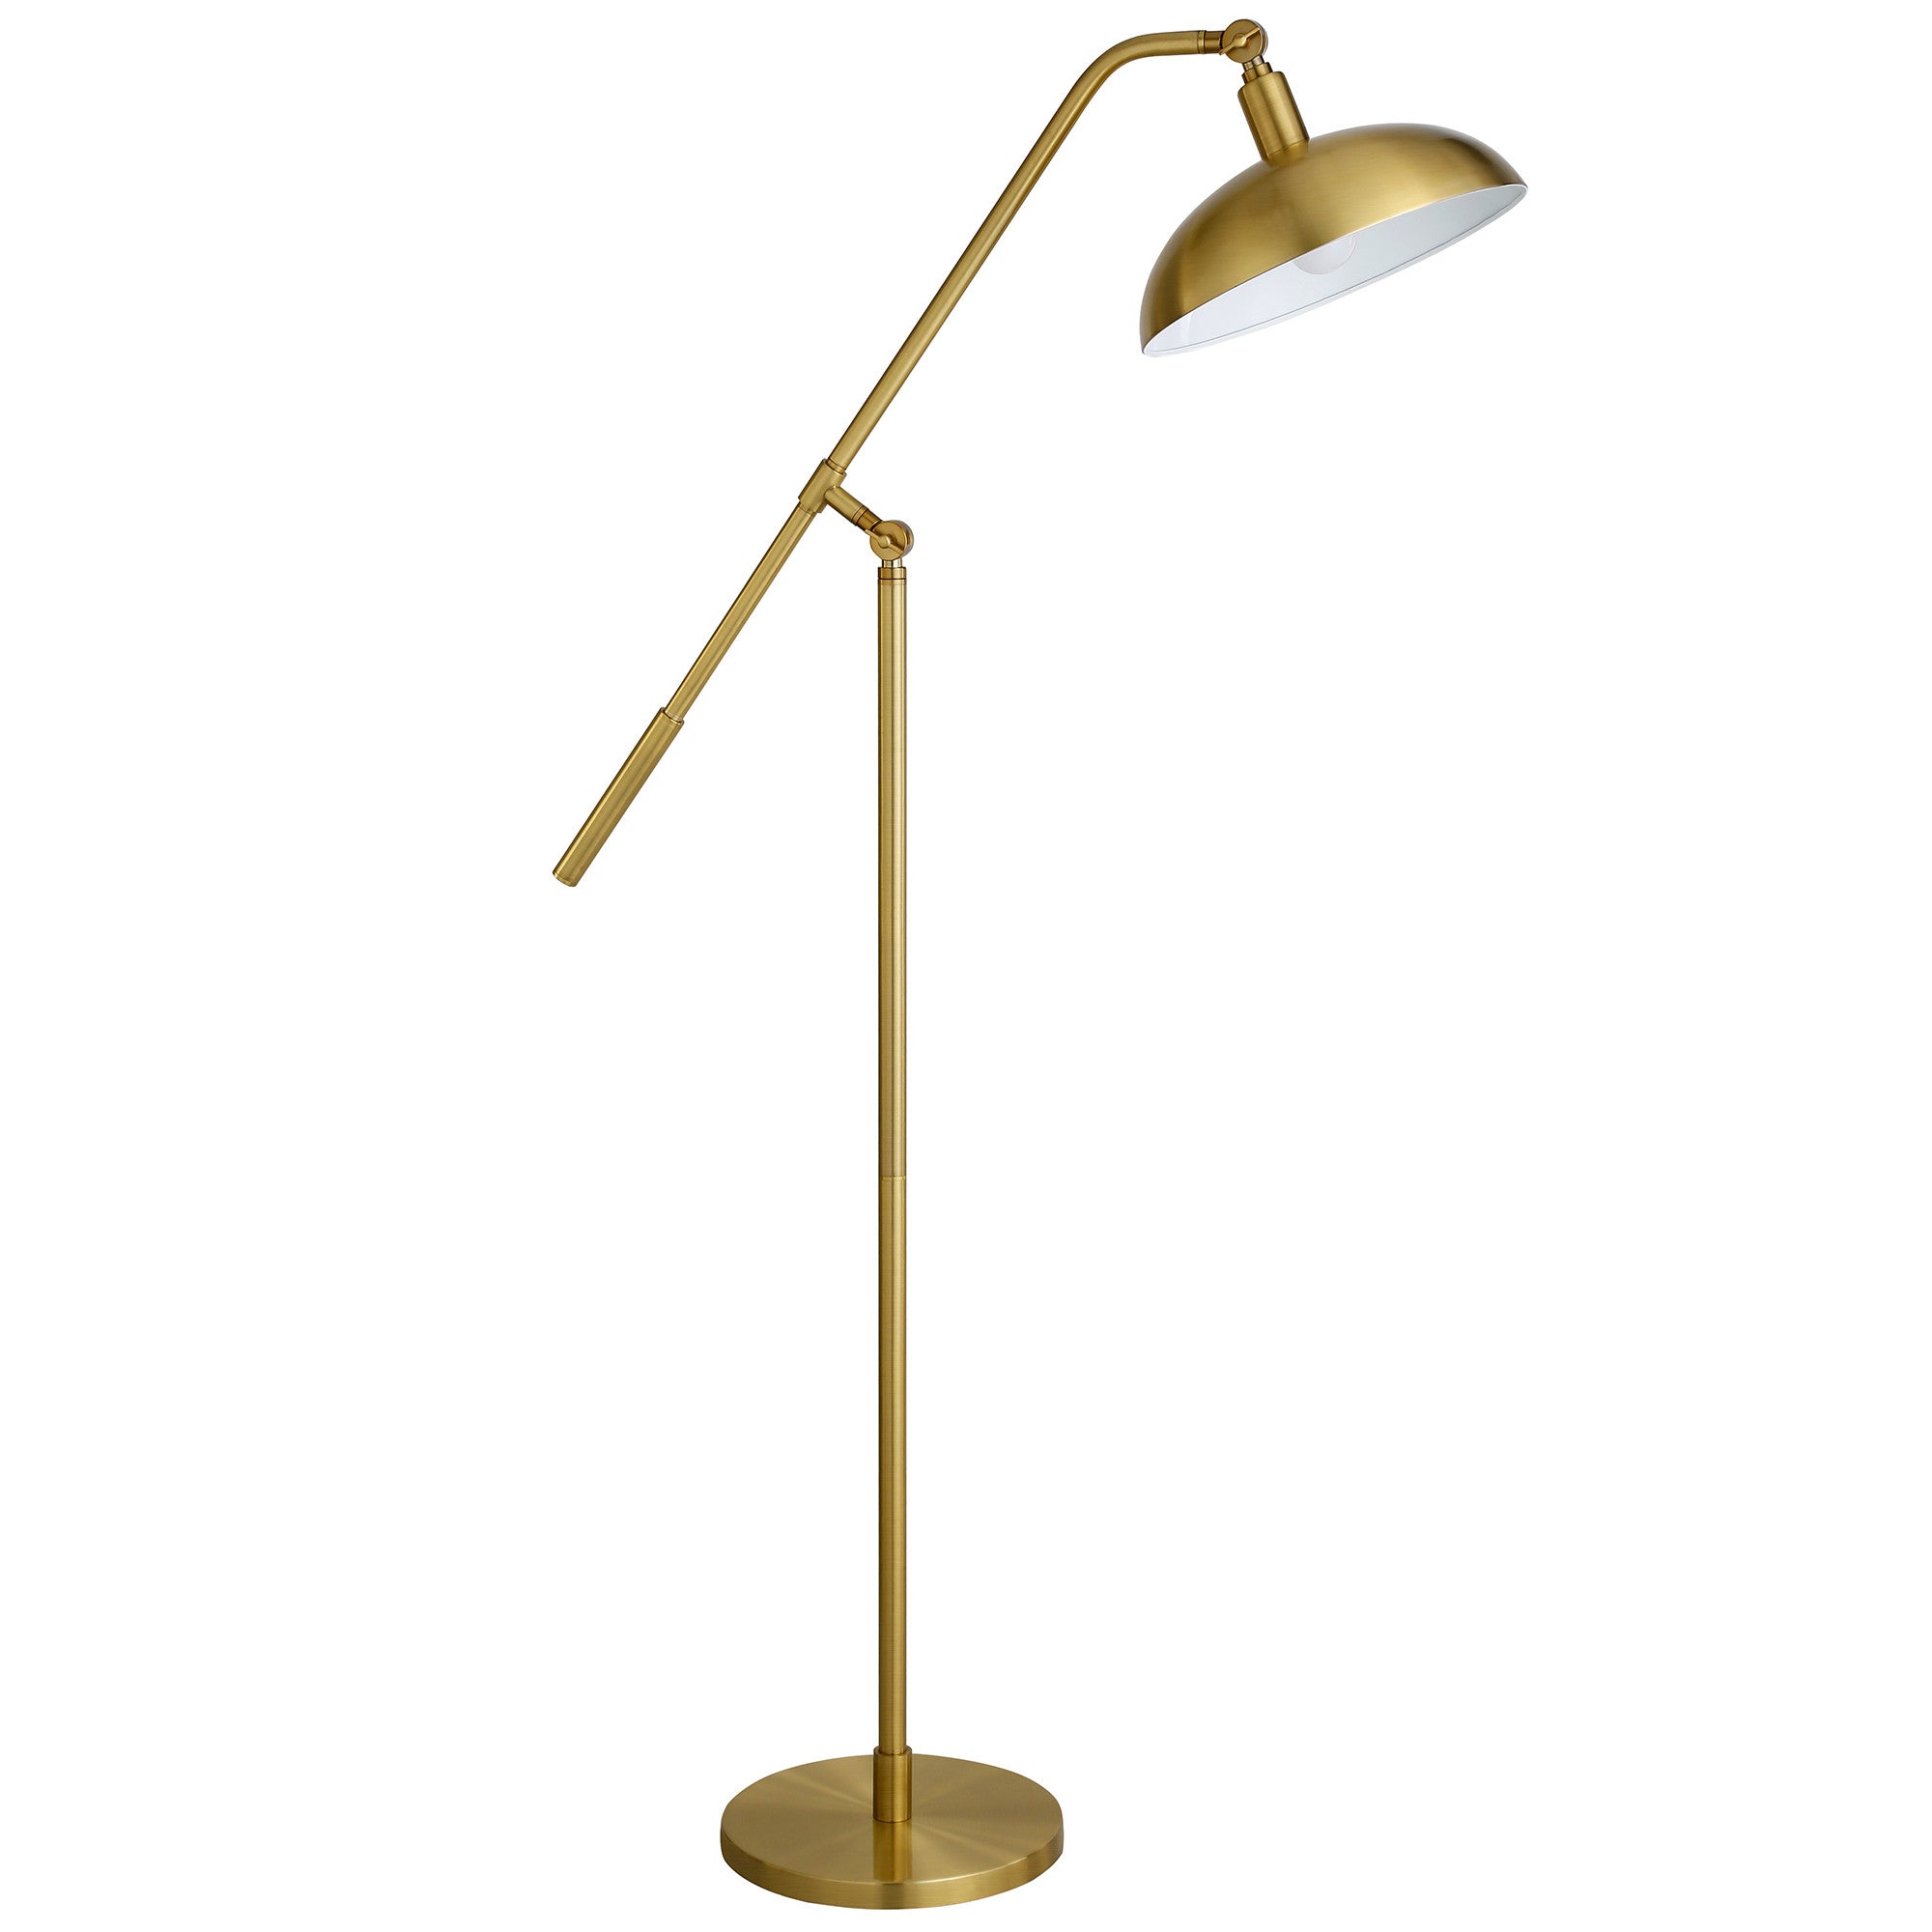 62" Brass Reading Floor Lamp With Brass Dome Shade